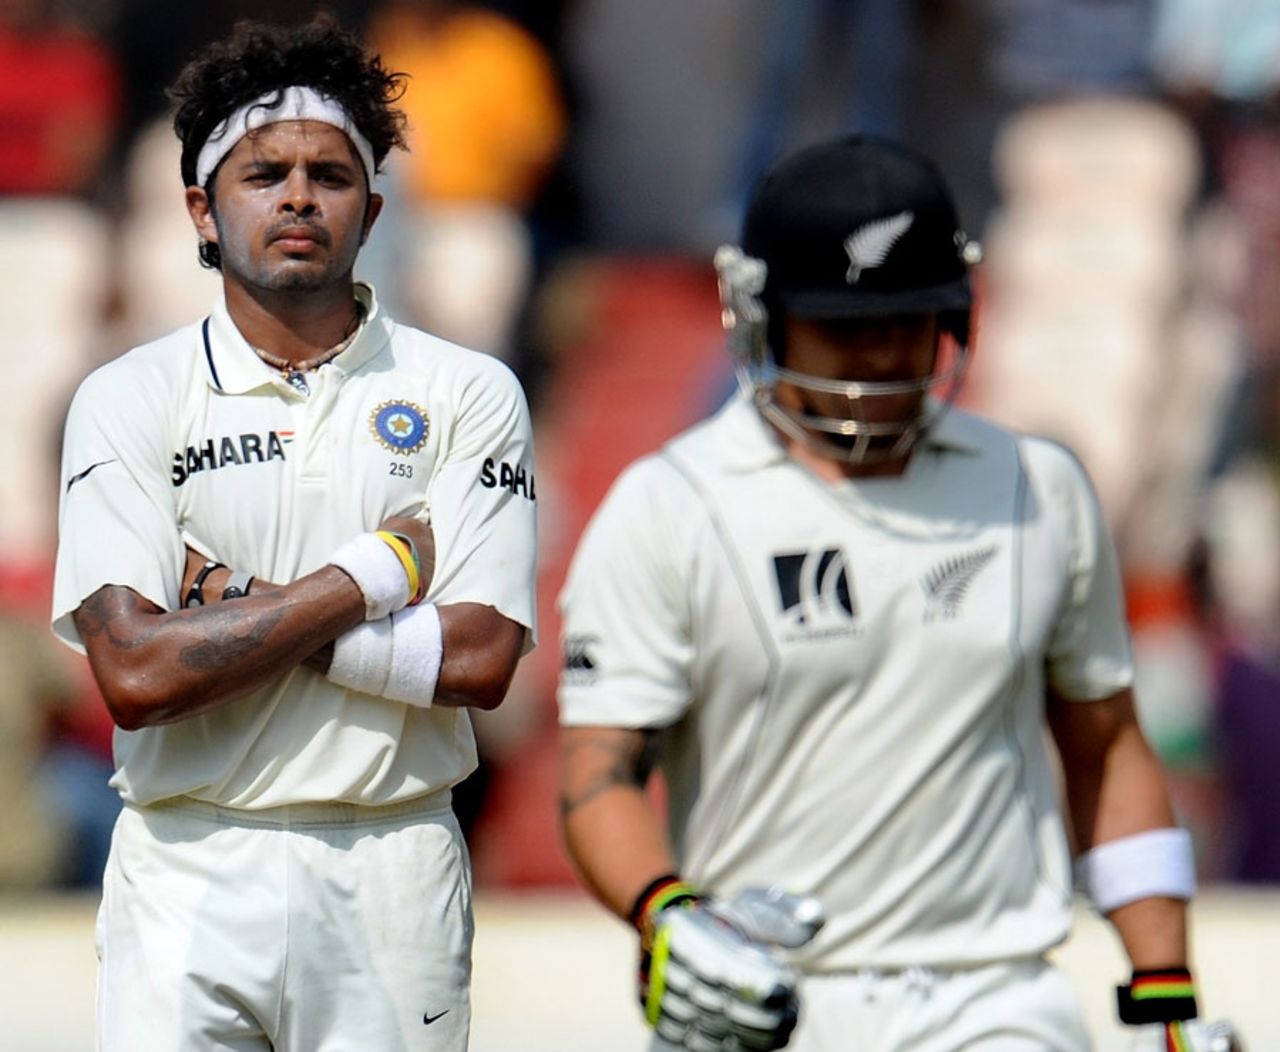 Sreesanth watches Brendon McCullum depart after dismissing him for 225, India v New Zealand, 2nd Test, Hyderabad, 5th day, November 16, 2010